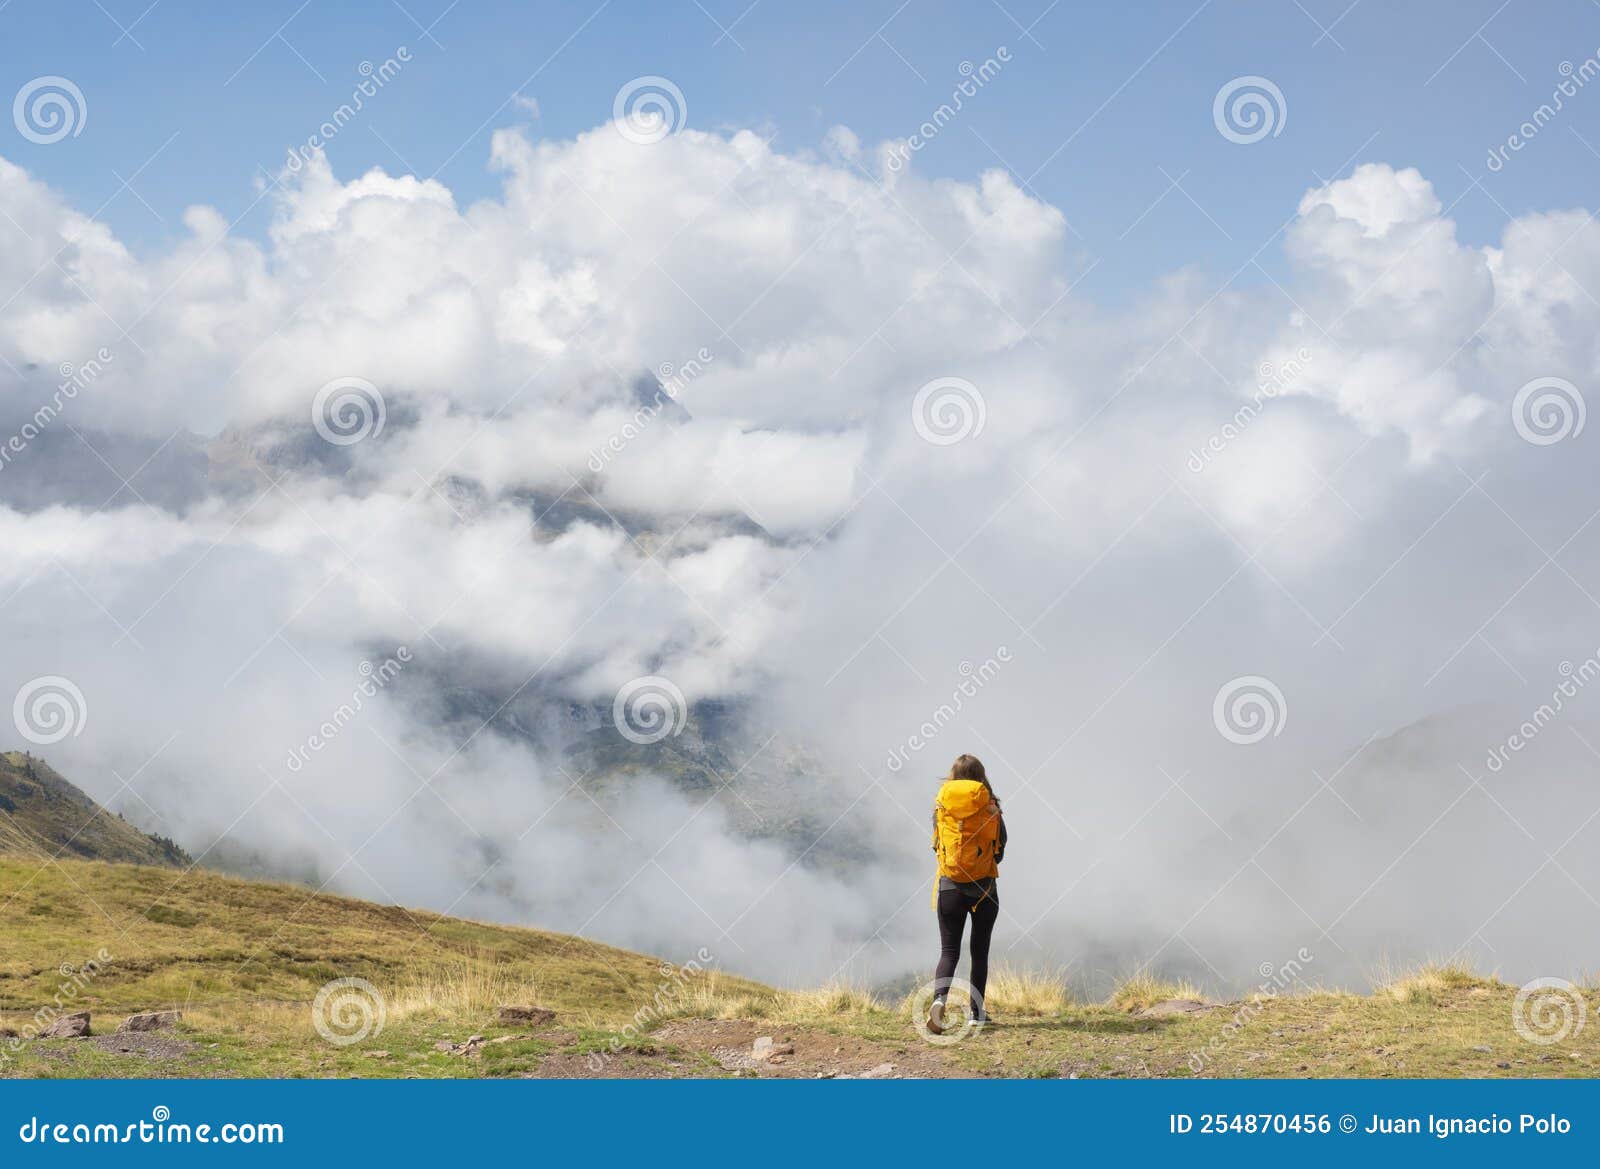 girl with yellow backpack hiking in the pyrenees, with the mountains in the clouds in the background